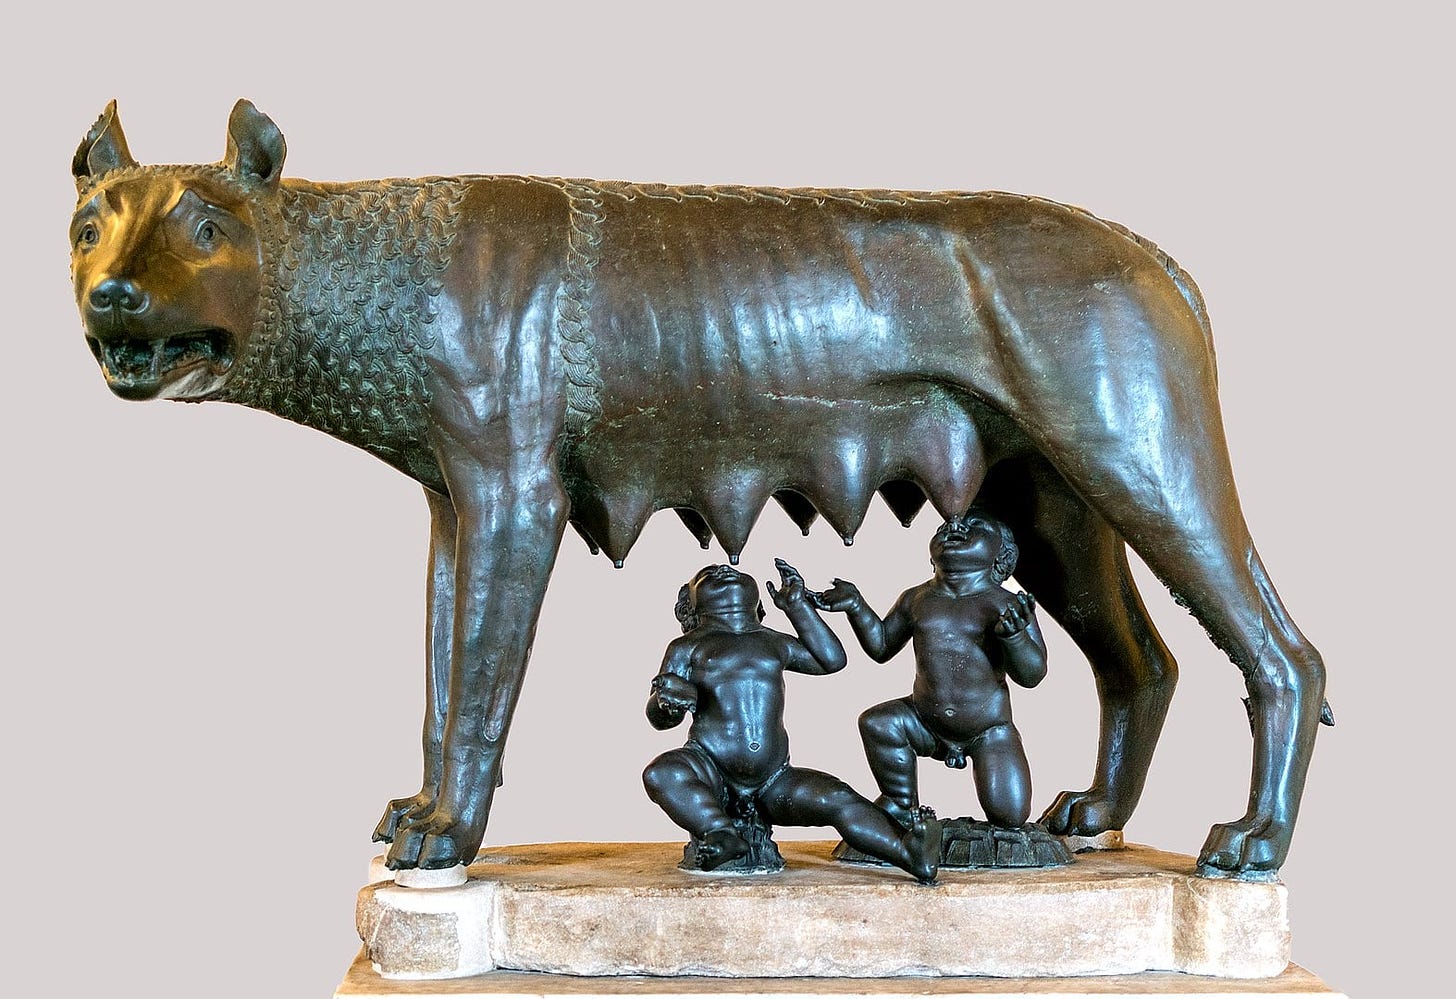 "Capitoline Wolf": Romulus and Remus suckling their wolf foster mother ...